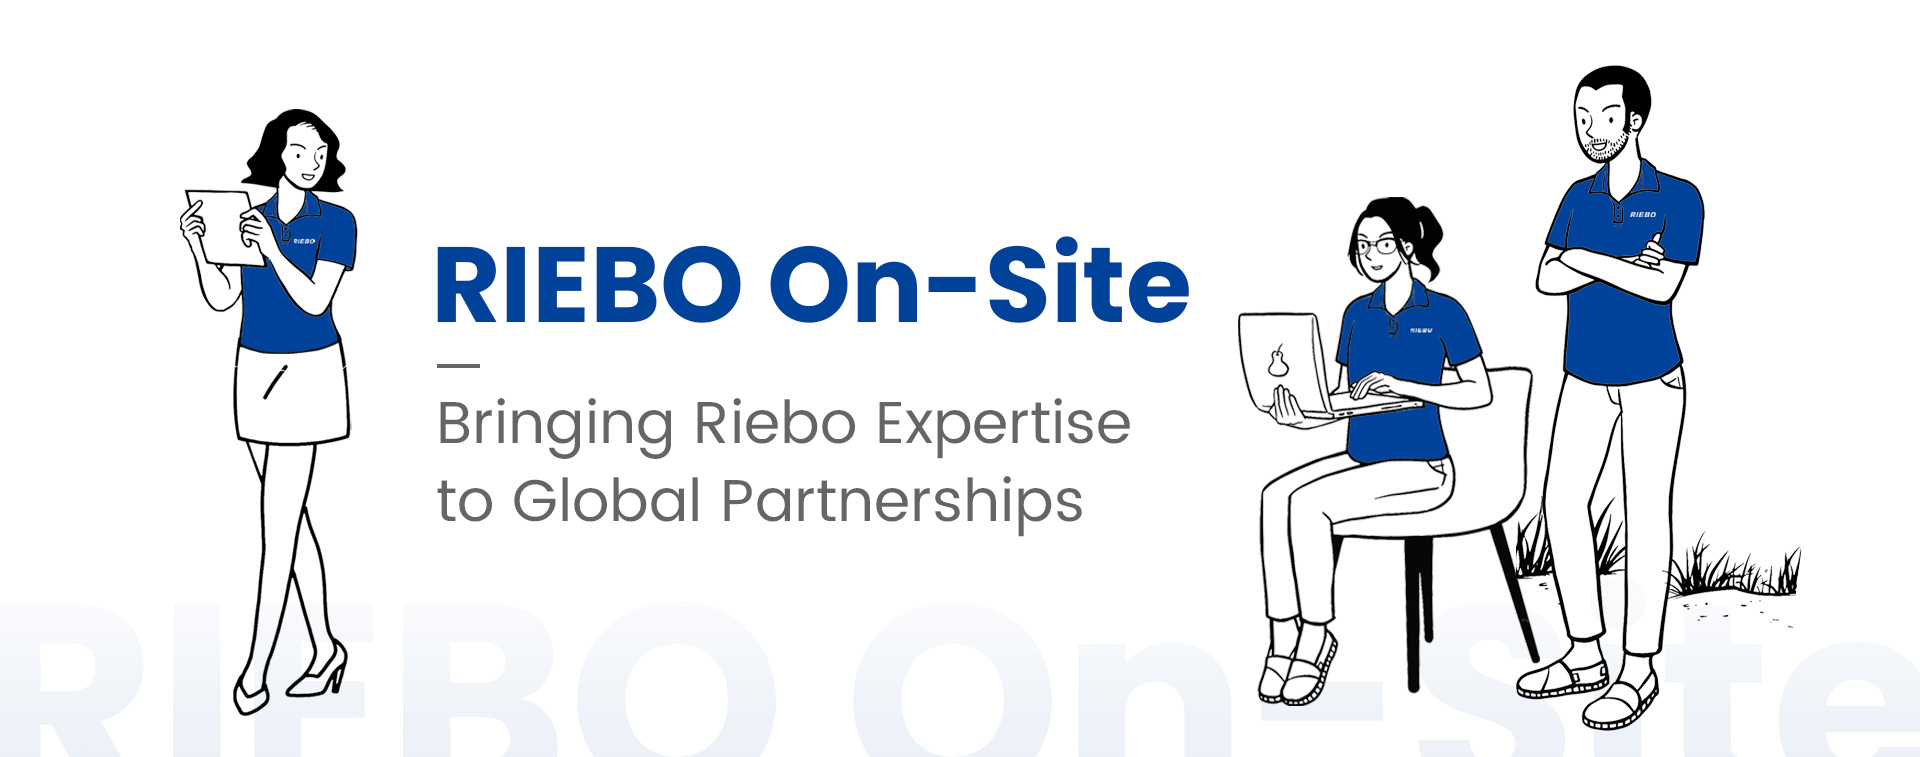 RIEBO On-Site | Bringing Riebo Expertise to Global Partnerships